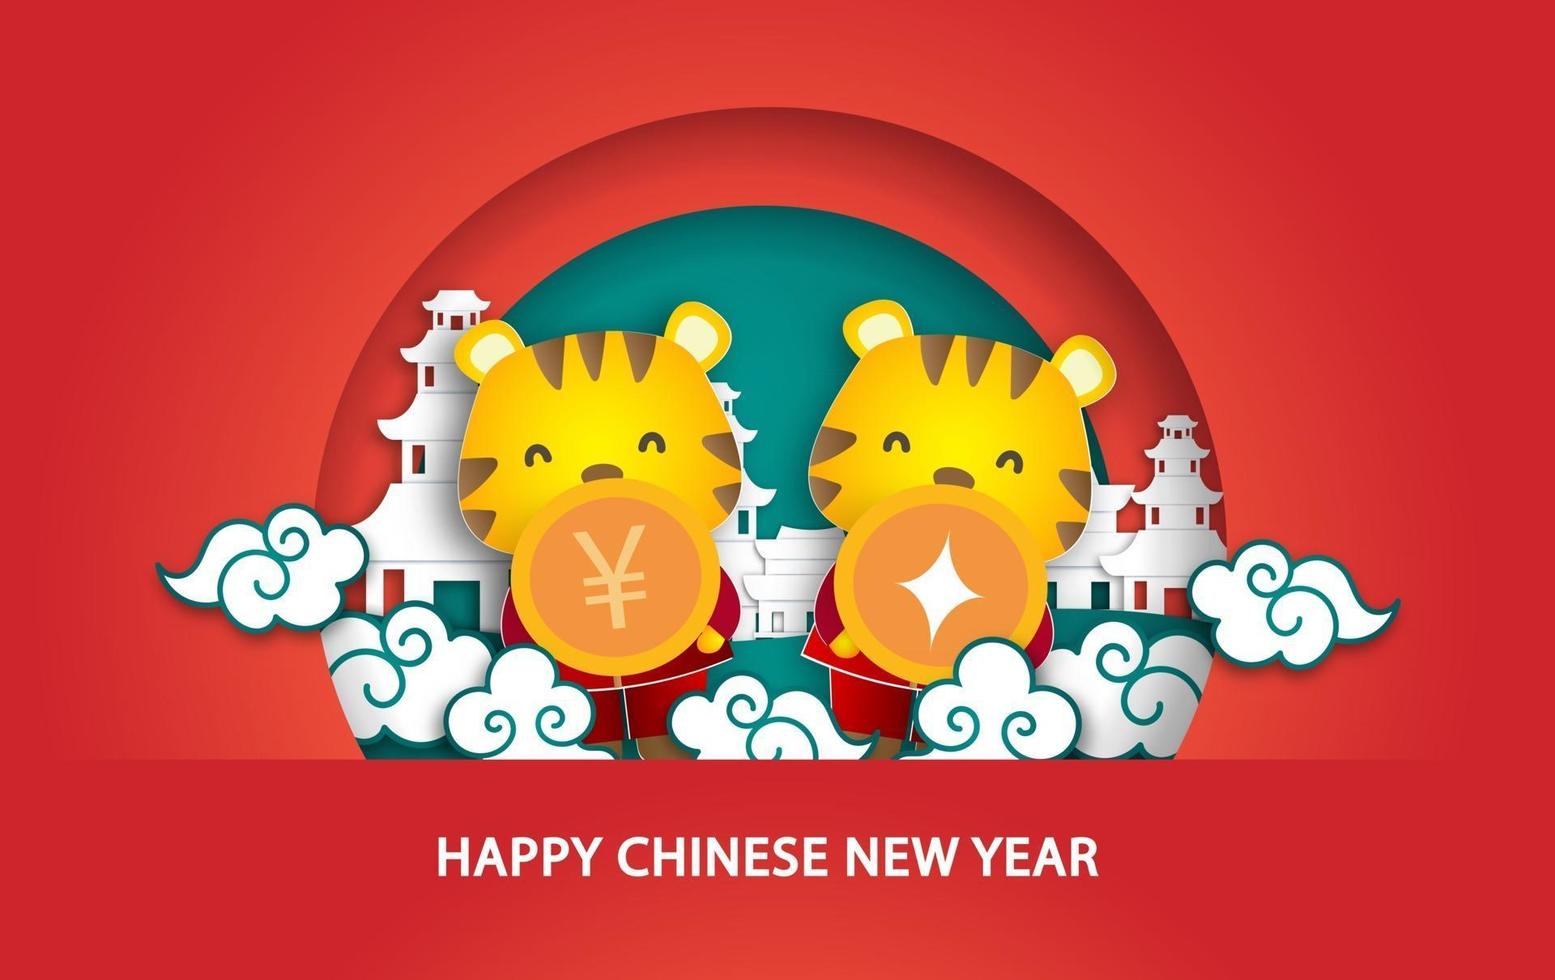 Chinese new year 2022 year of the tiger  card in paper cut style vector